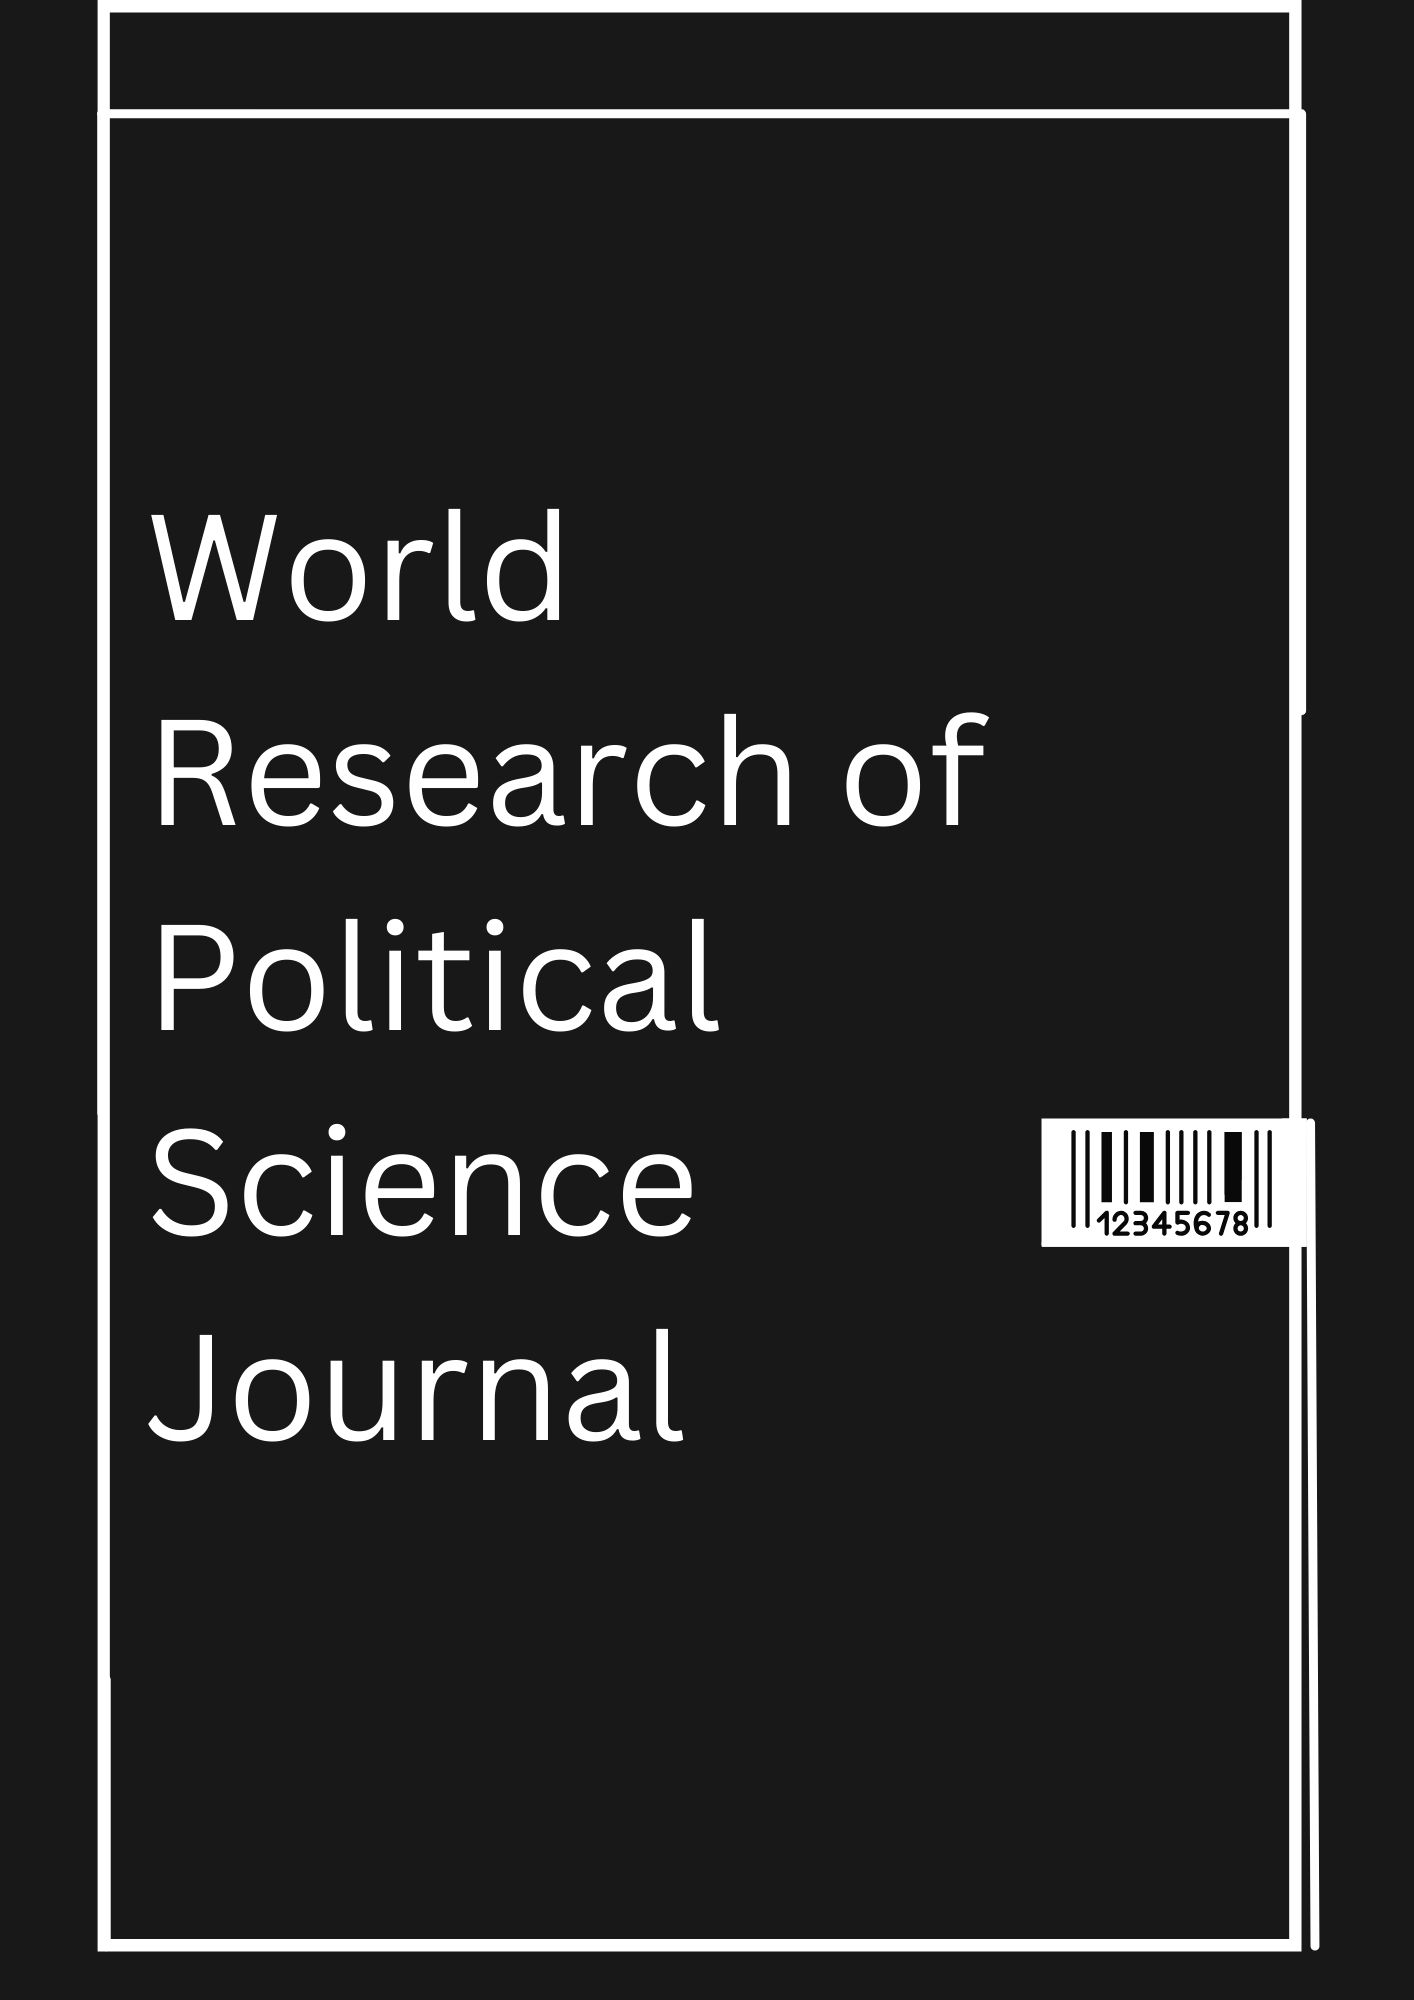 World Research of Political Science Journal